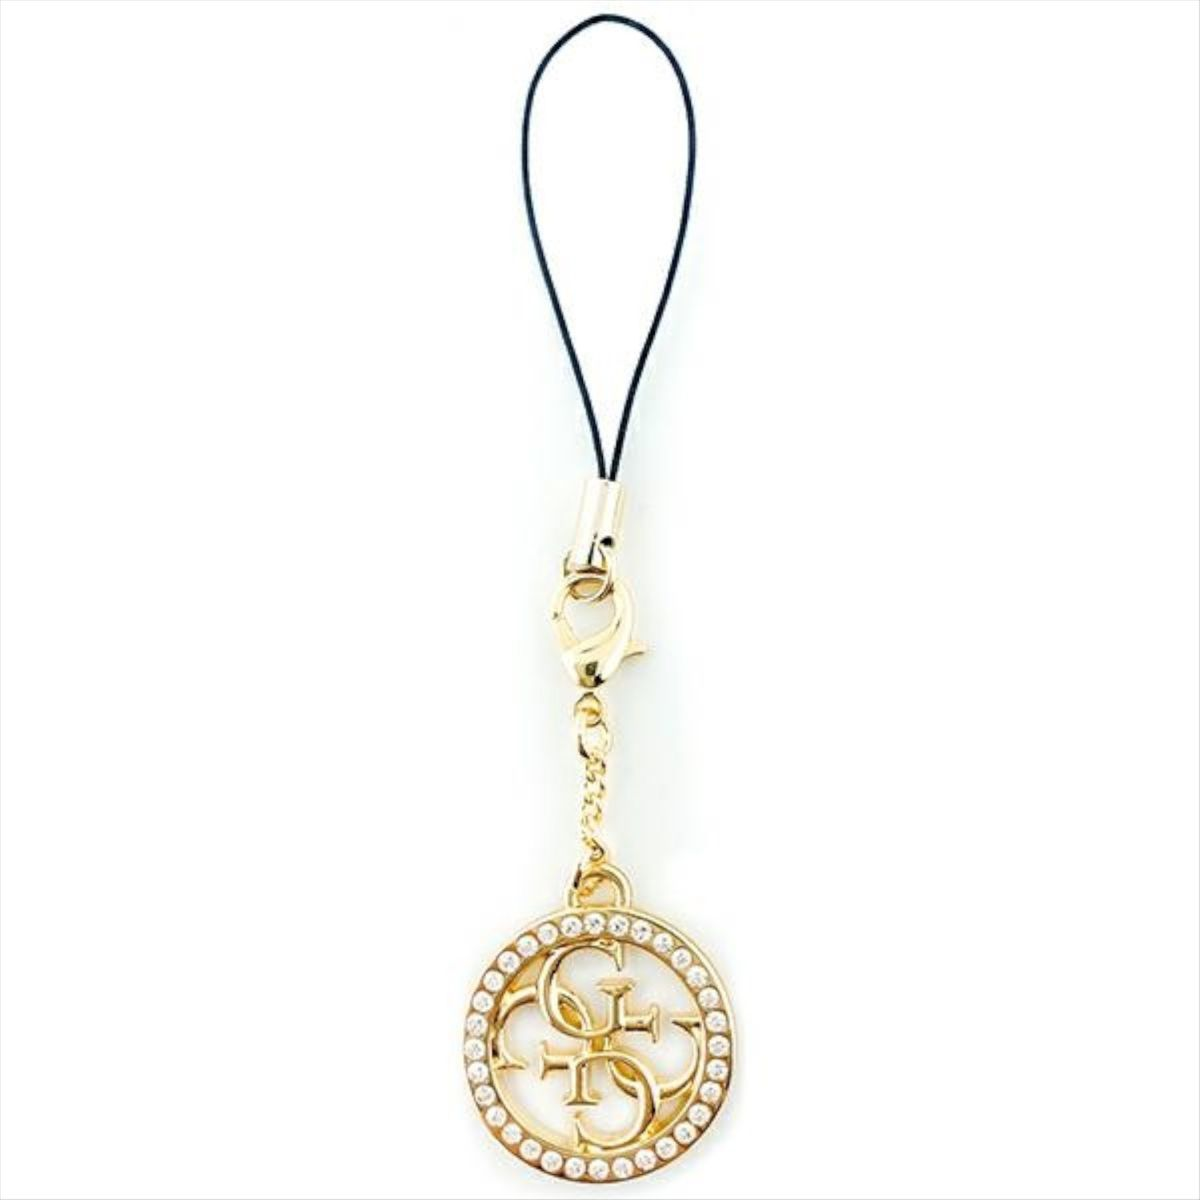 GUESS Guess Phone Strap Gold Universell, 4G Universell, Rhinestone Charm Umhängetasche, Anhänger